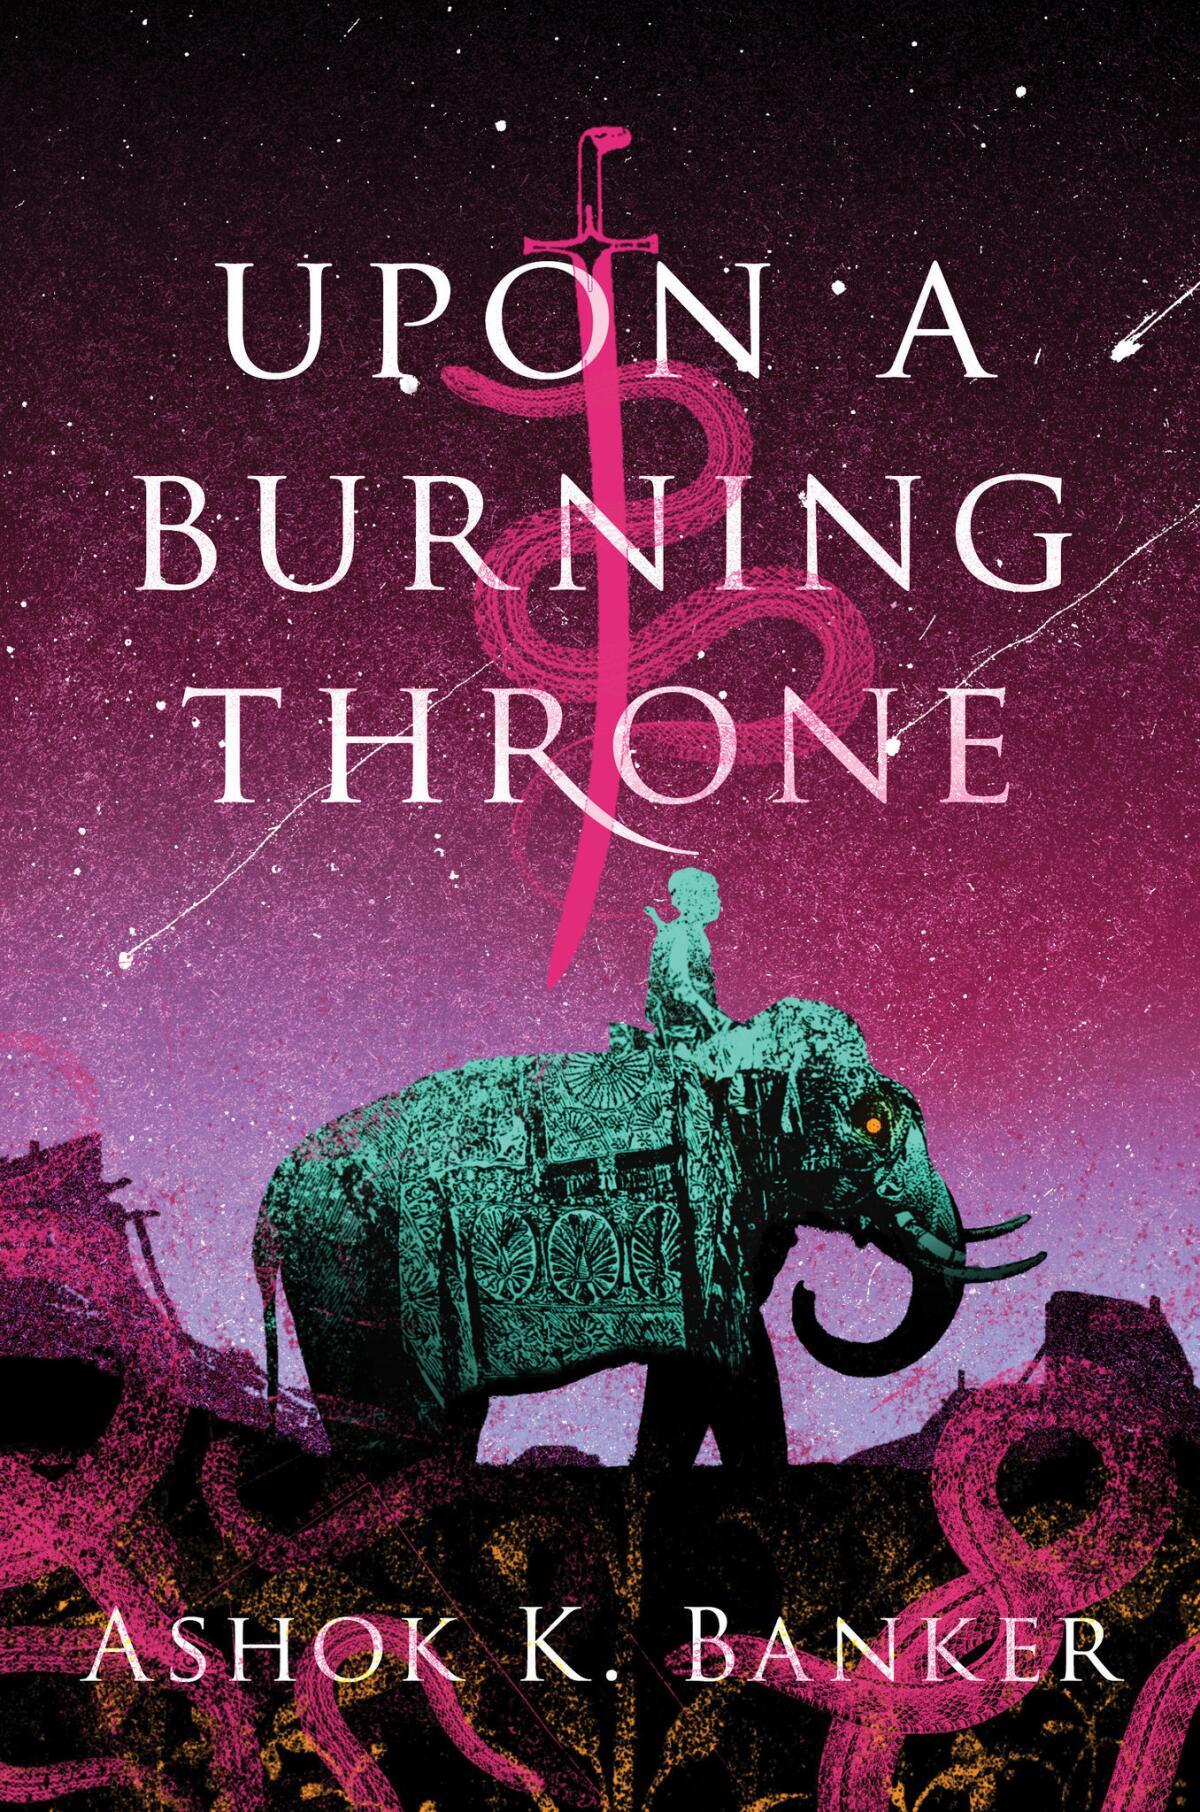 A book jacket for Ashok K. Banker's "Upon a Burning Throne."